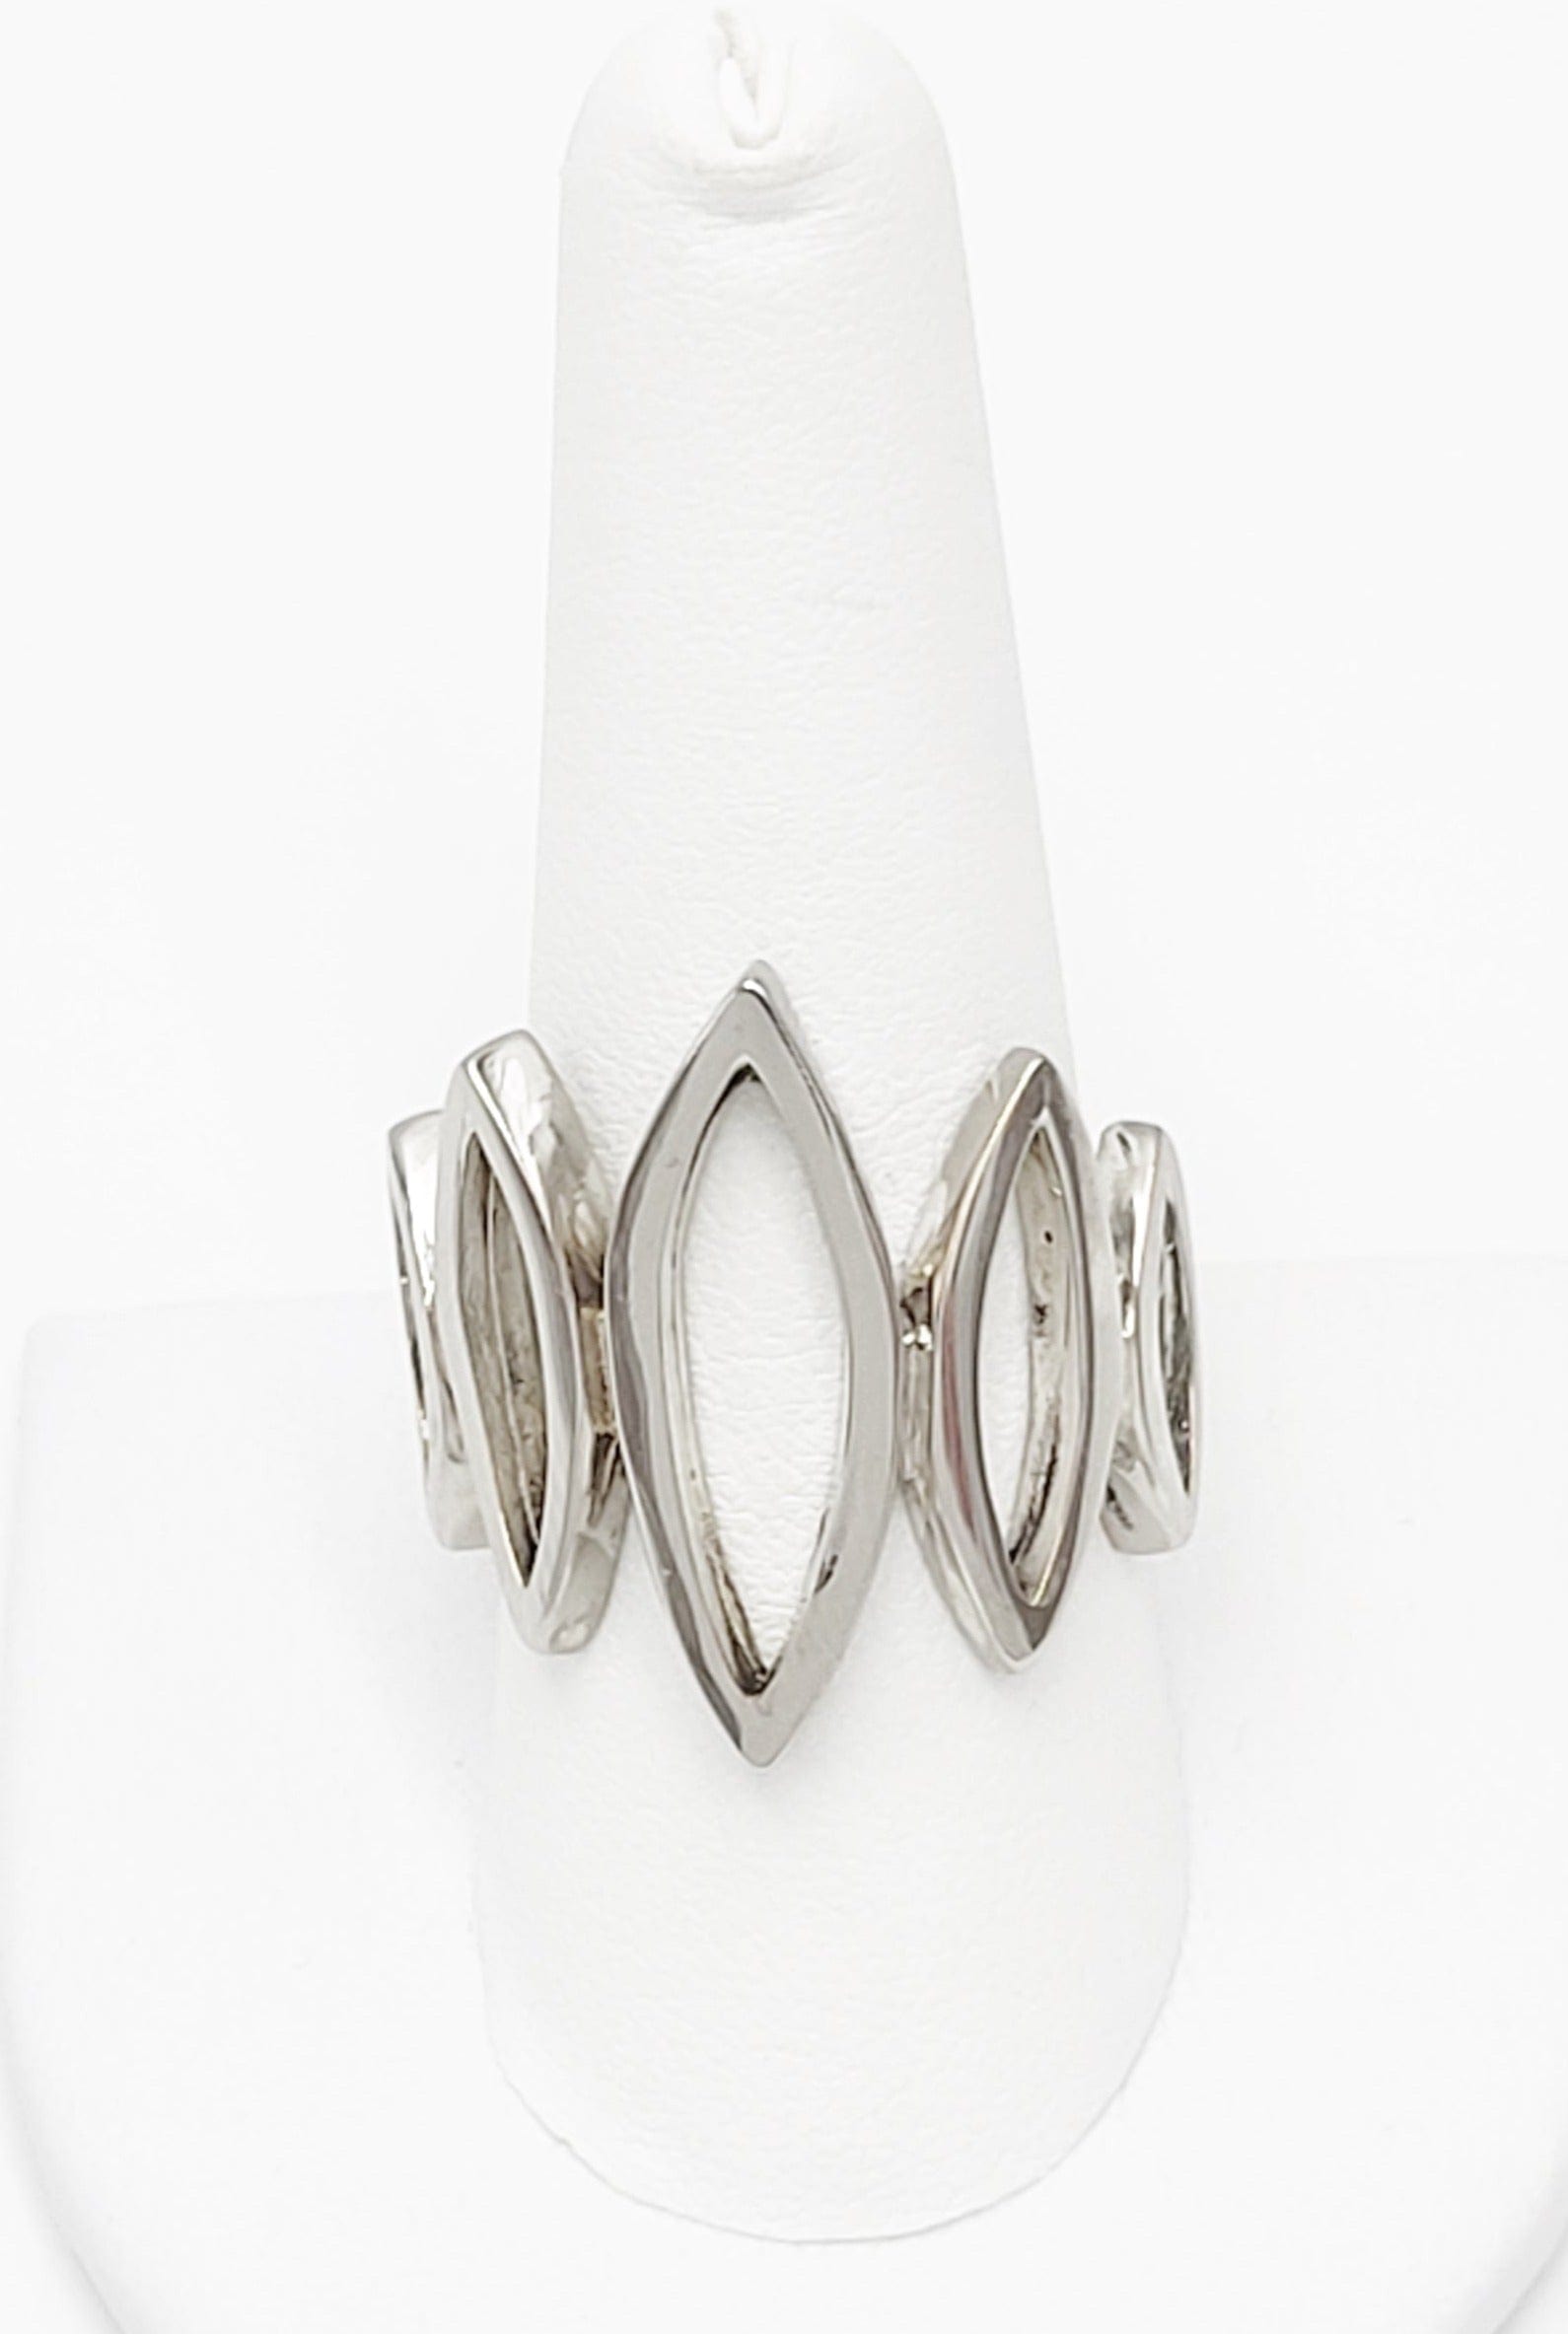 Tiffany & Co. Jewelry Tiffany & Co Sterling Large Modernist Architectural Ovals Cocktail Ring w/ Bag